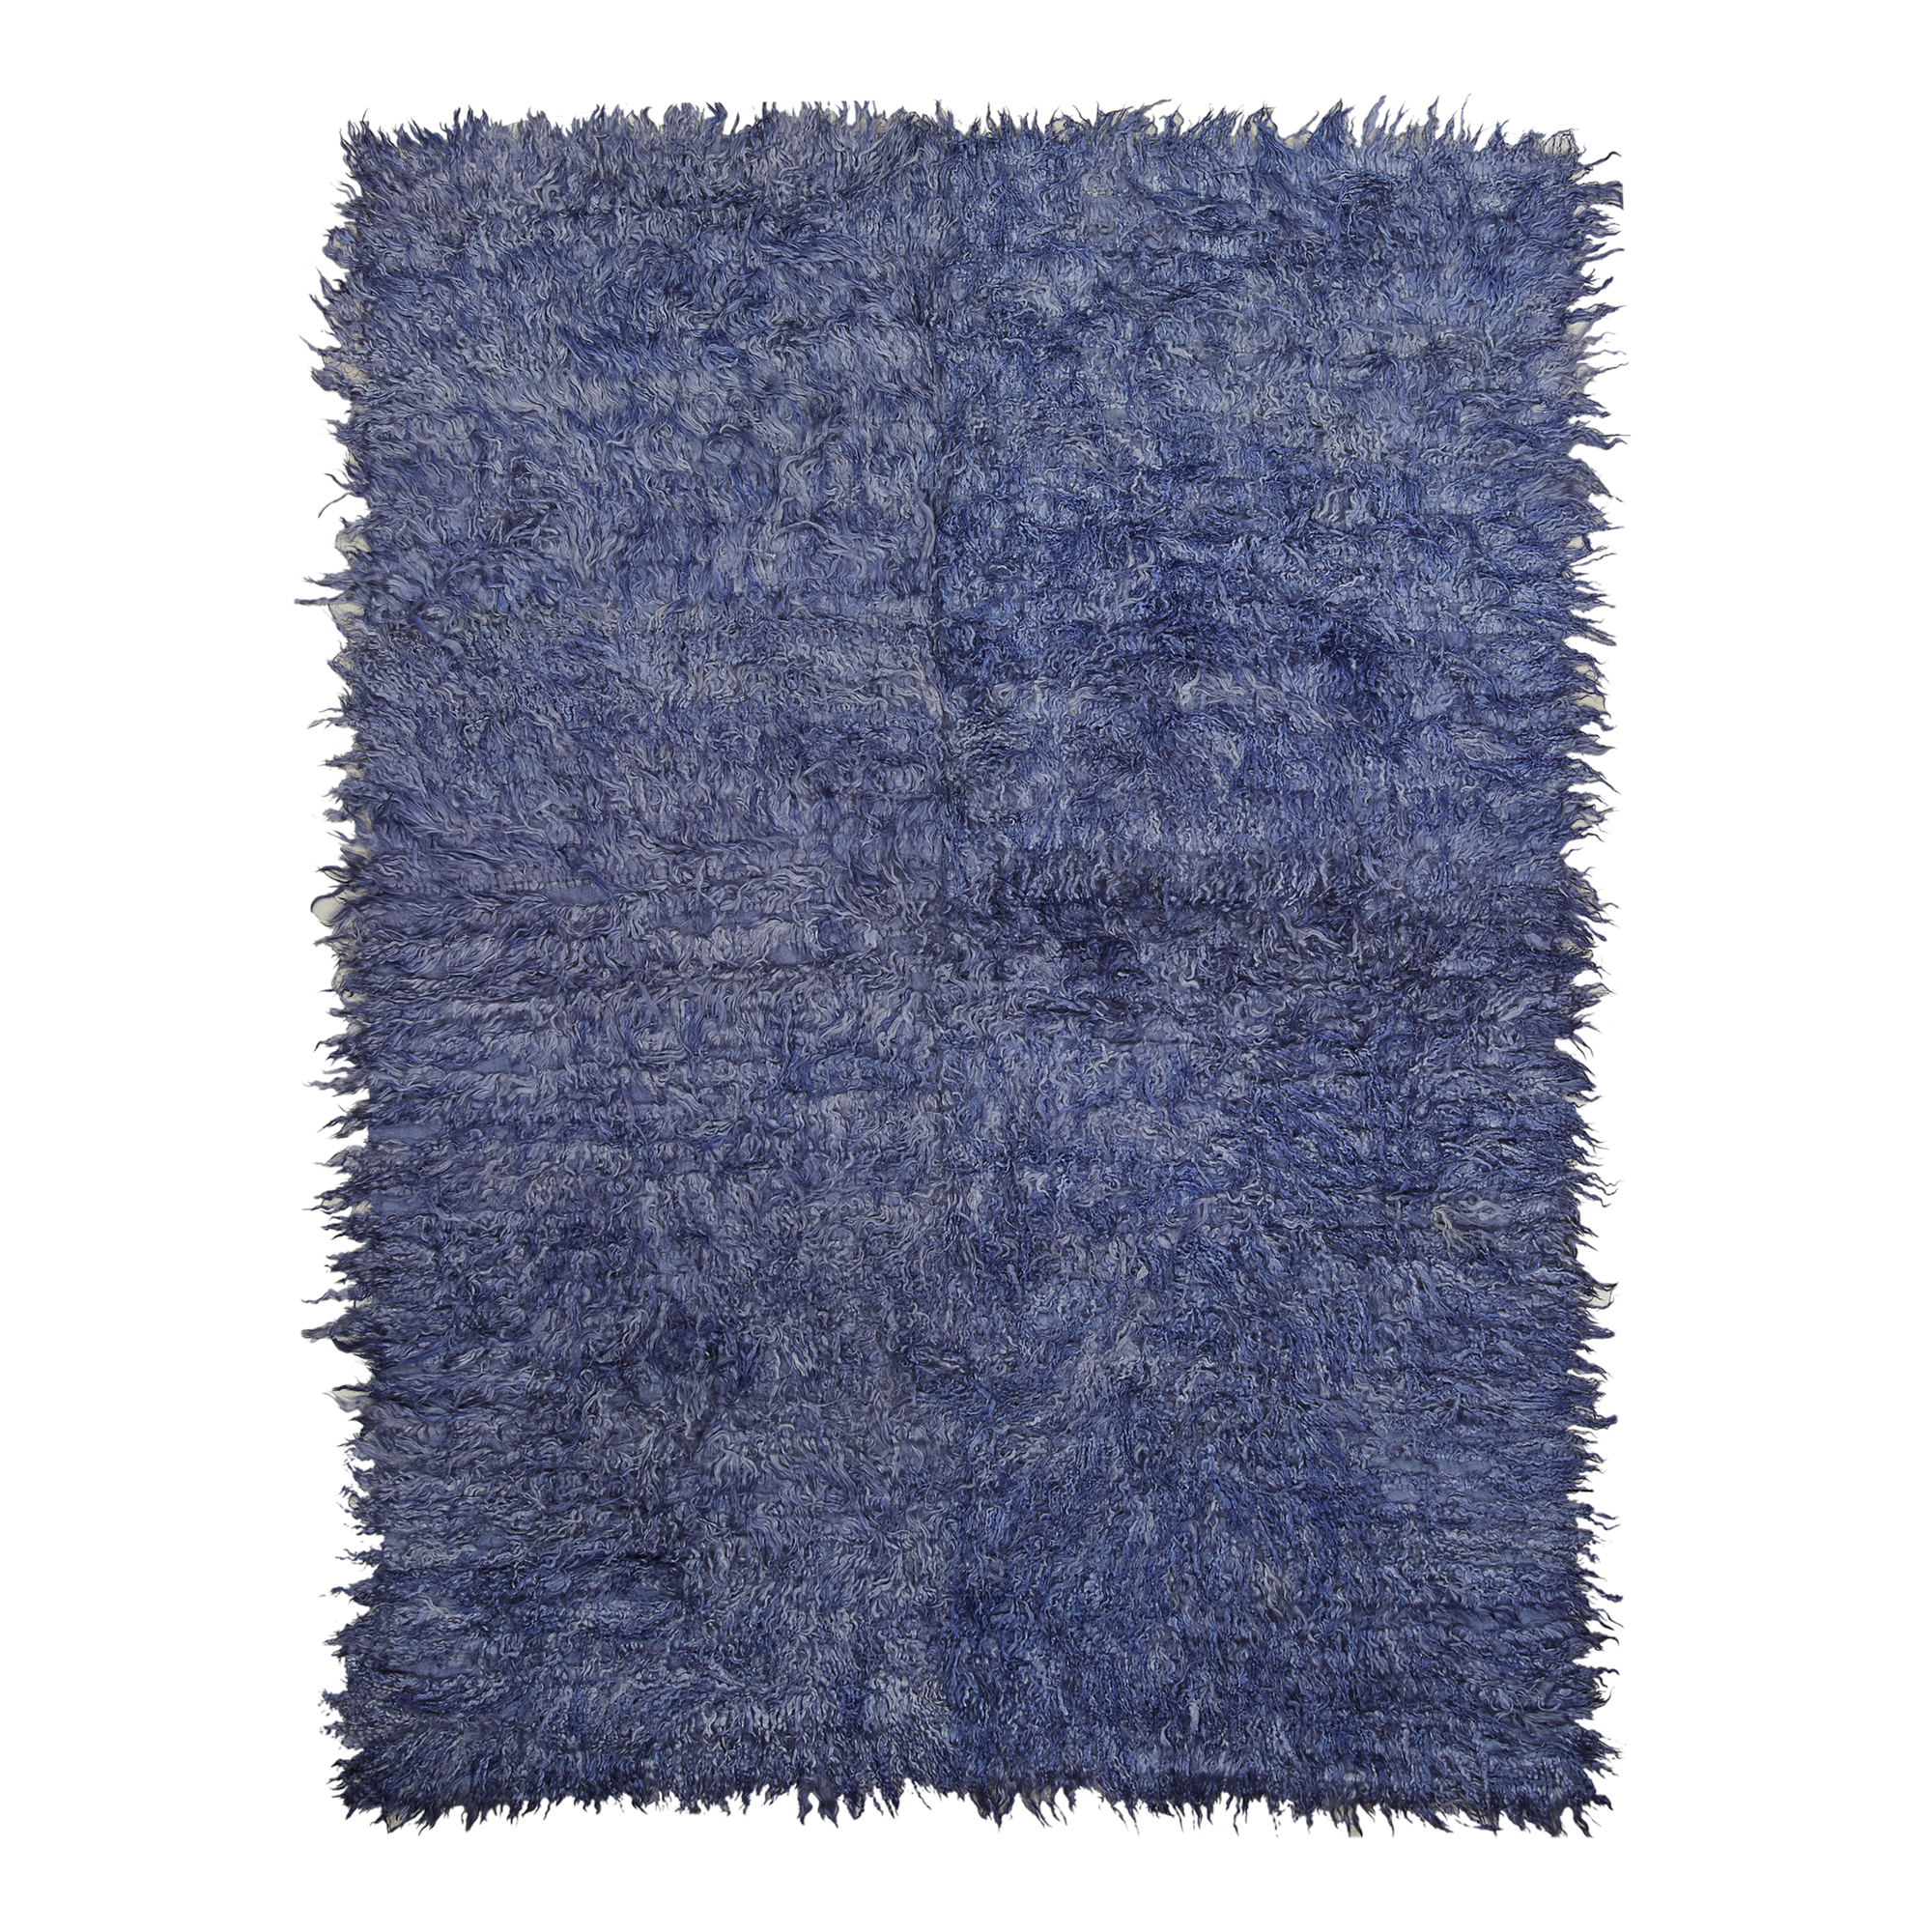 Tulu rugs (pronounced “two-lou”) are thick shaggy silky modern/tribal rugs.